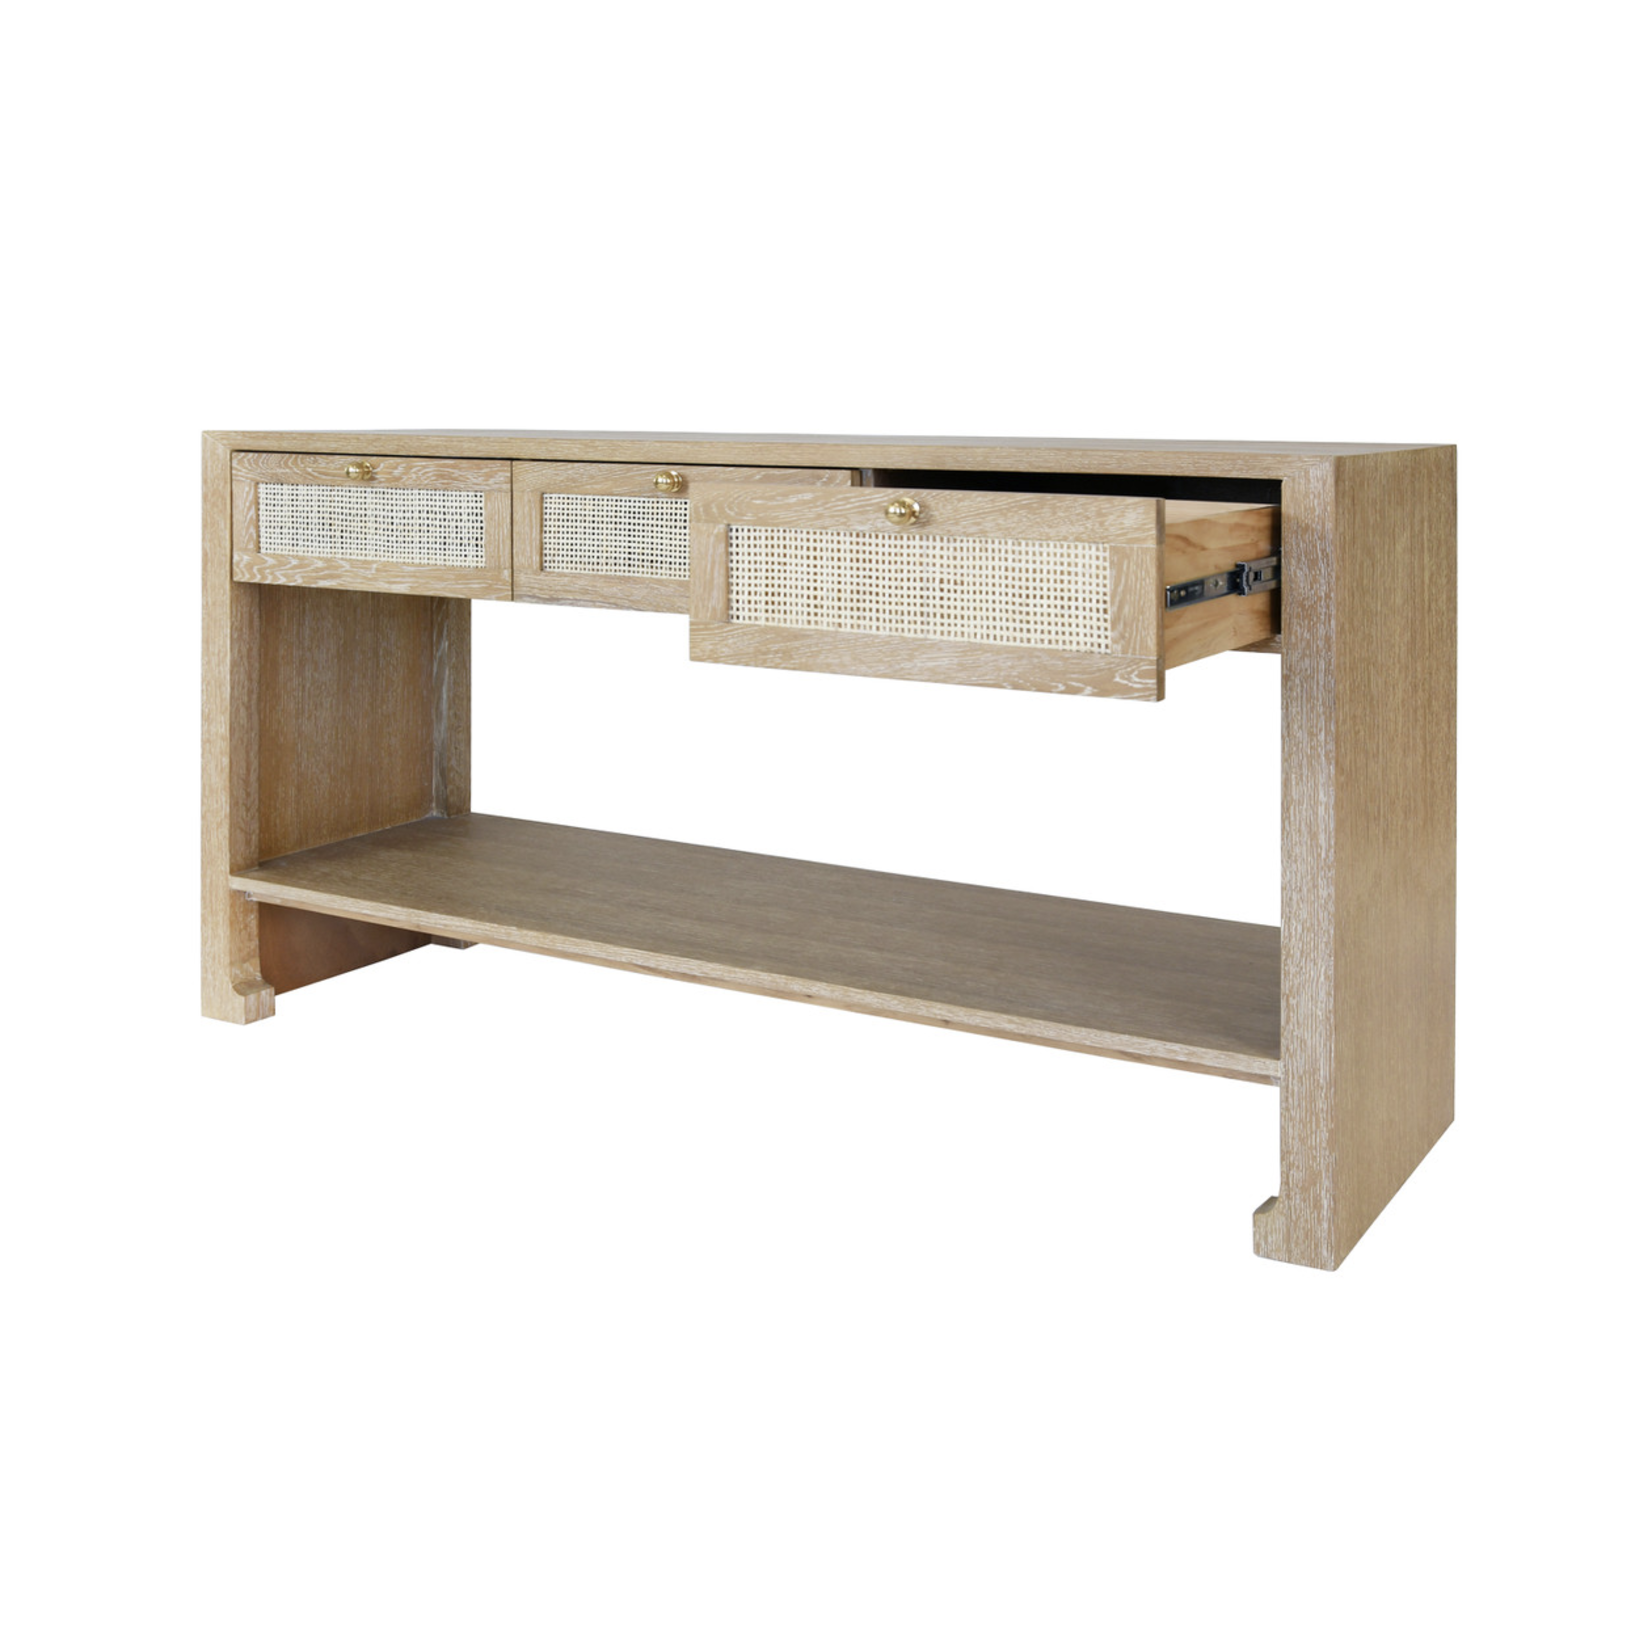 Outside The Box 58x18x32 Worlds Away Rosalind Natural Cerused Oak & Cane 3 Drawer Console